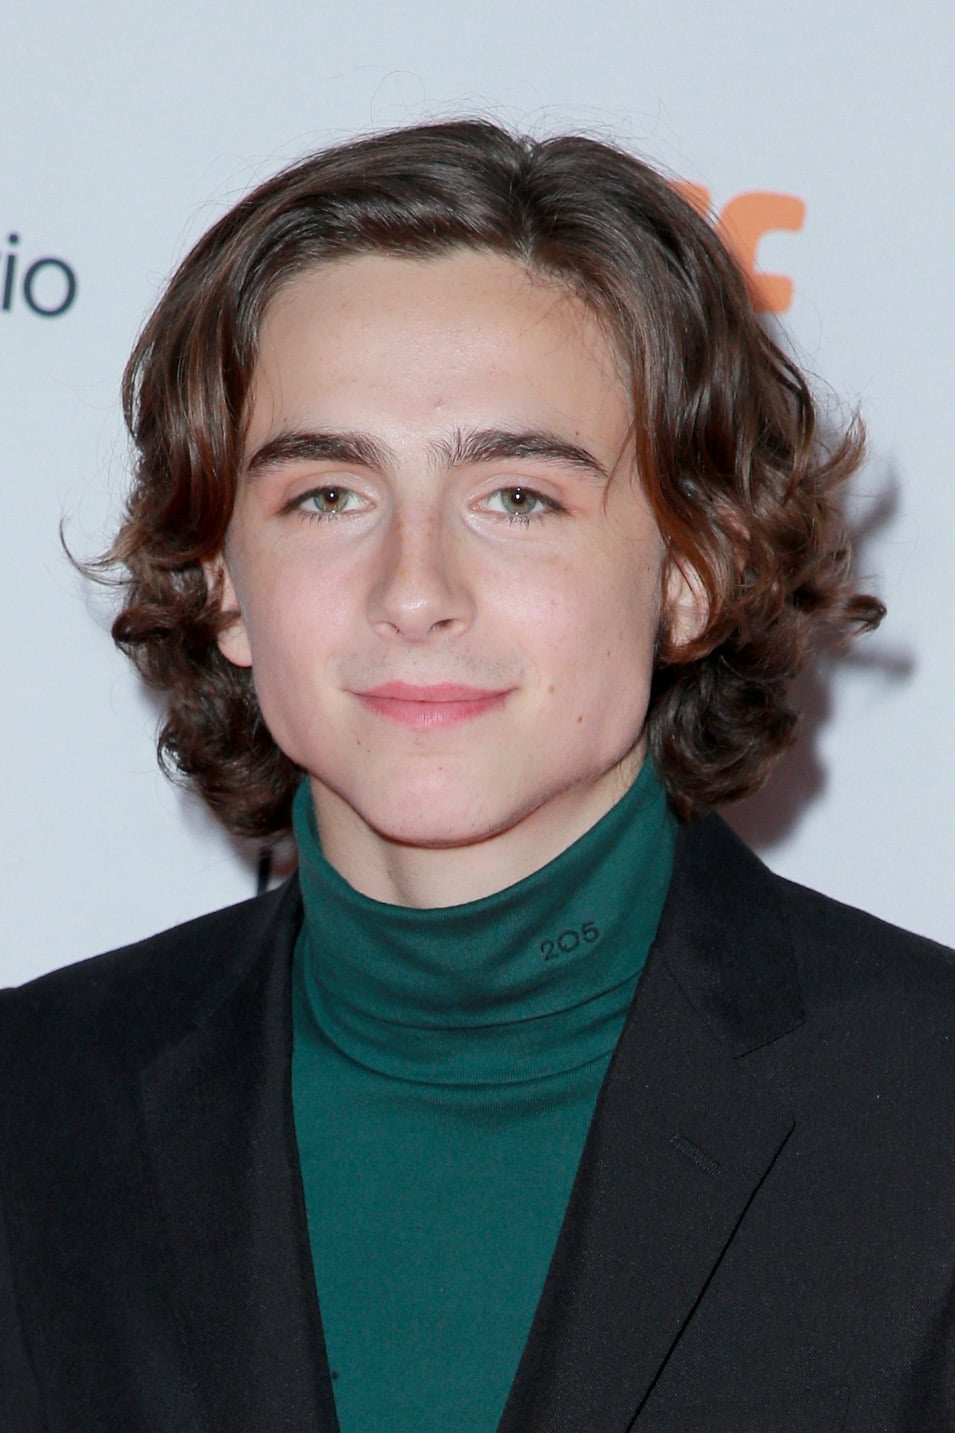 on-seventh-day-God-said-Let-there-be-Timoth%C3%A9e-Chalamet.jpg